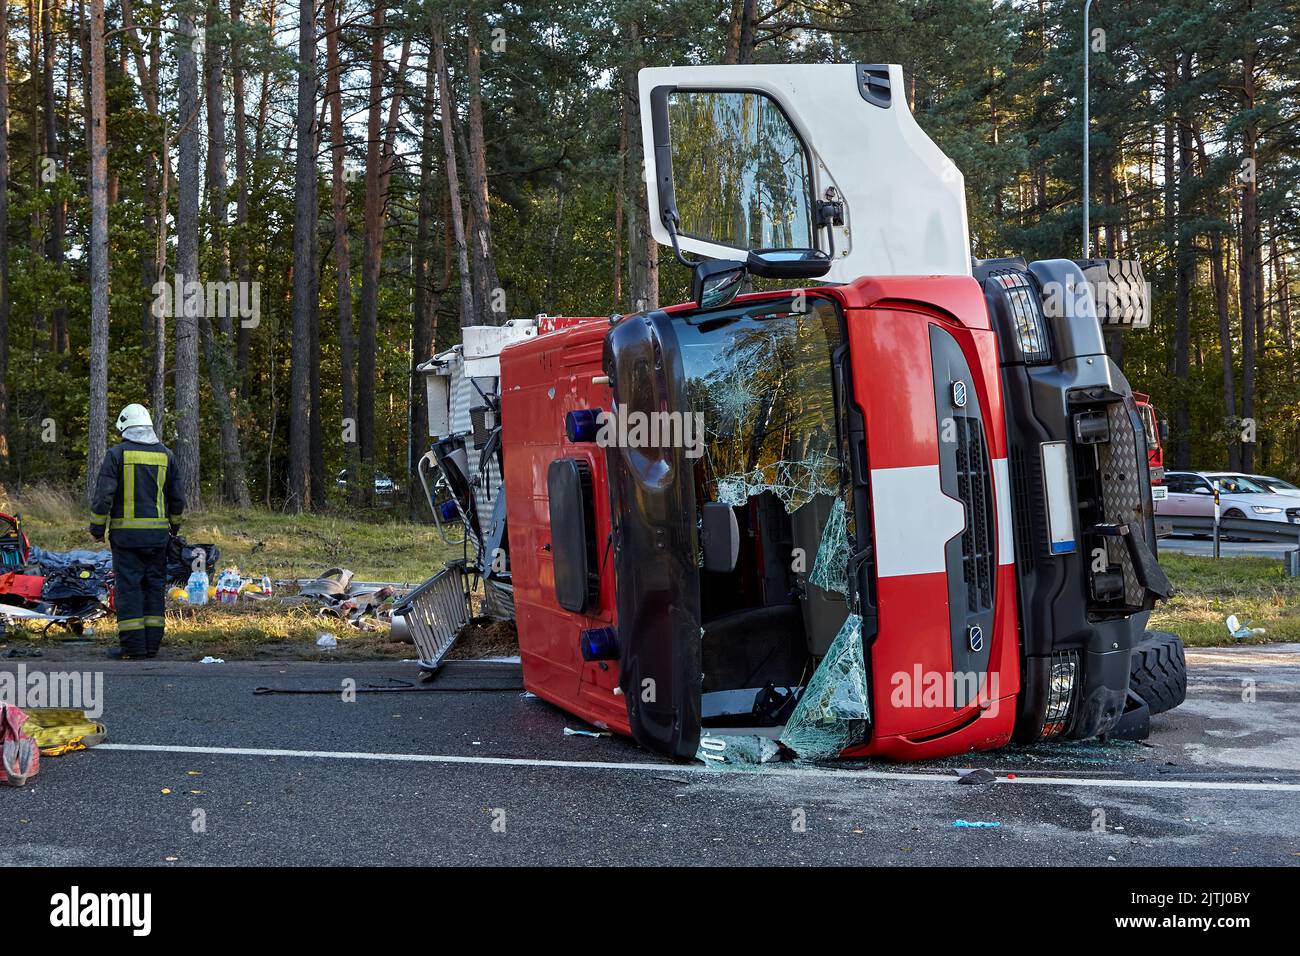 September 30, 2021,Upesciems Latvia: car accident on a road, fire truck after a collision with a car, transportation background Stock Photo